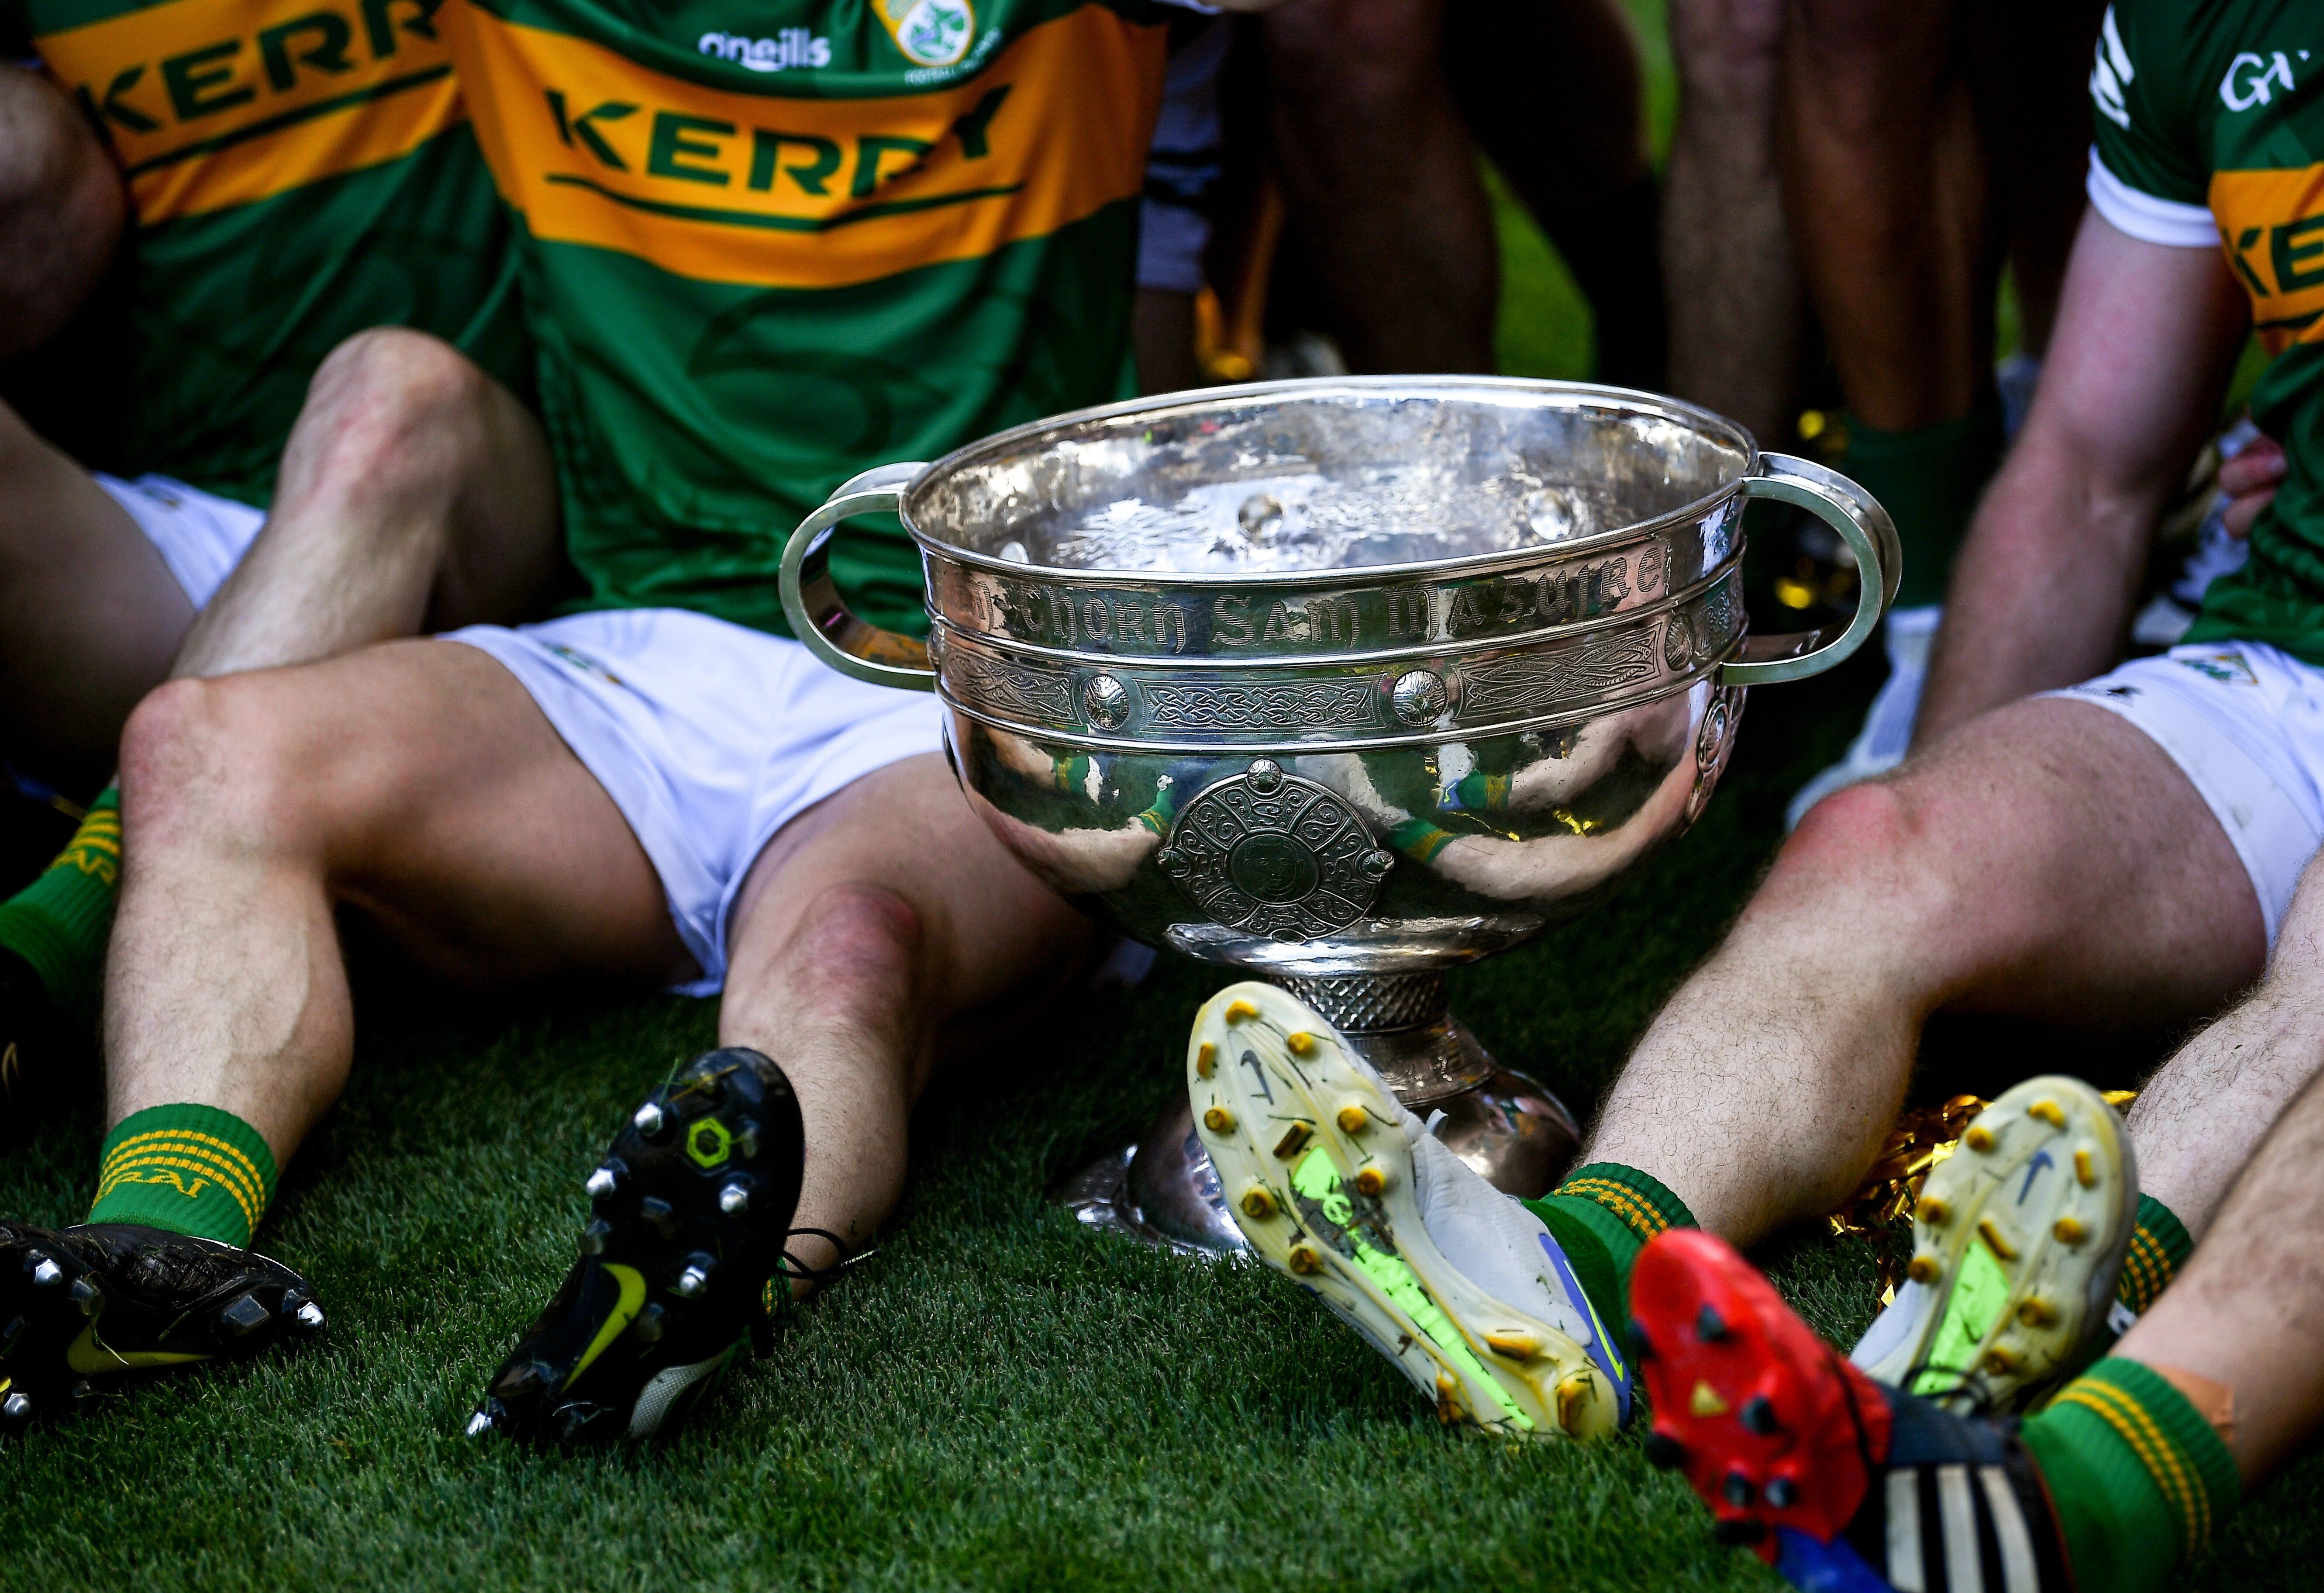 RTÉ Sport confirms televised GAA coverage this summer